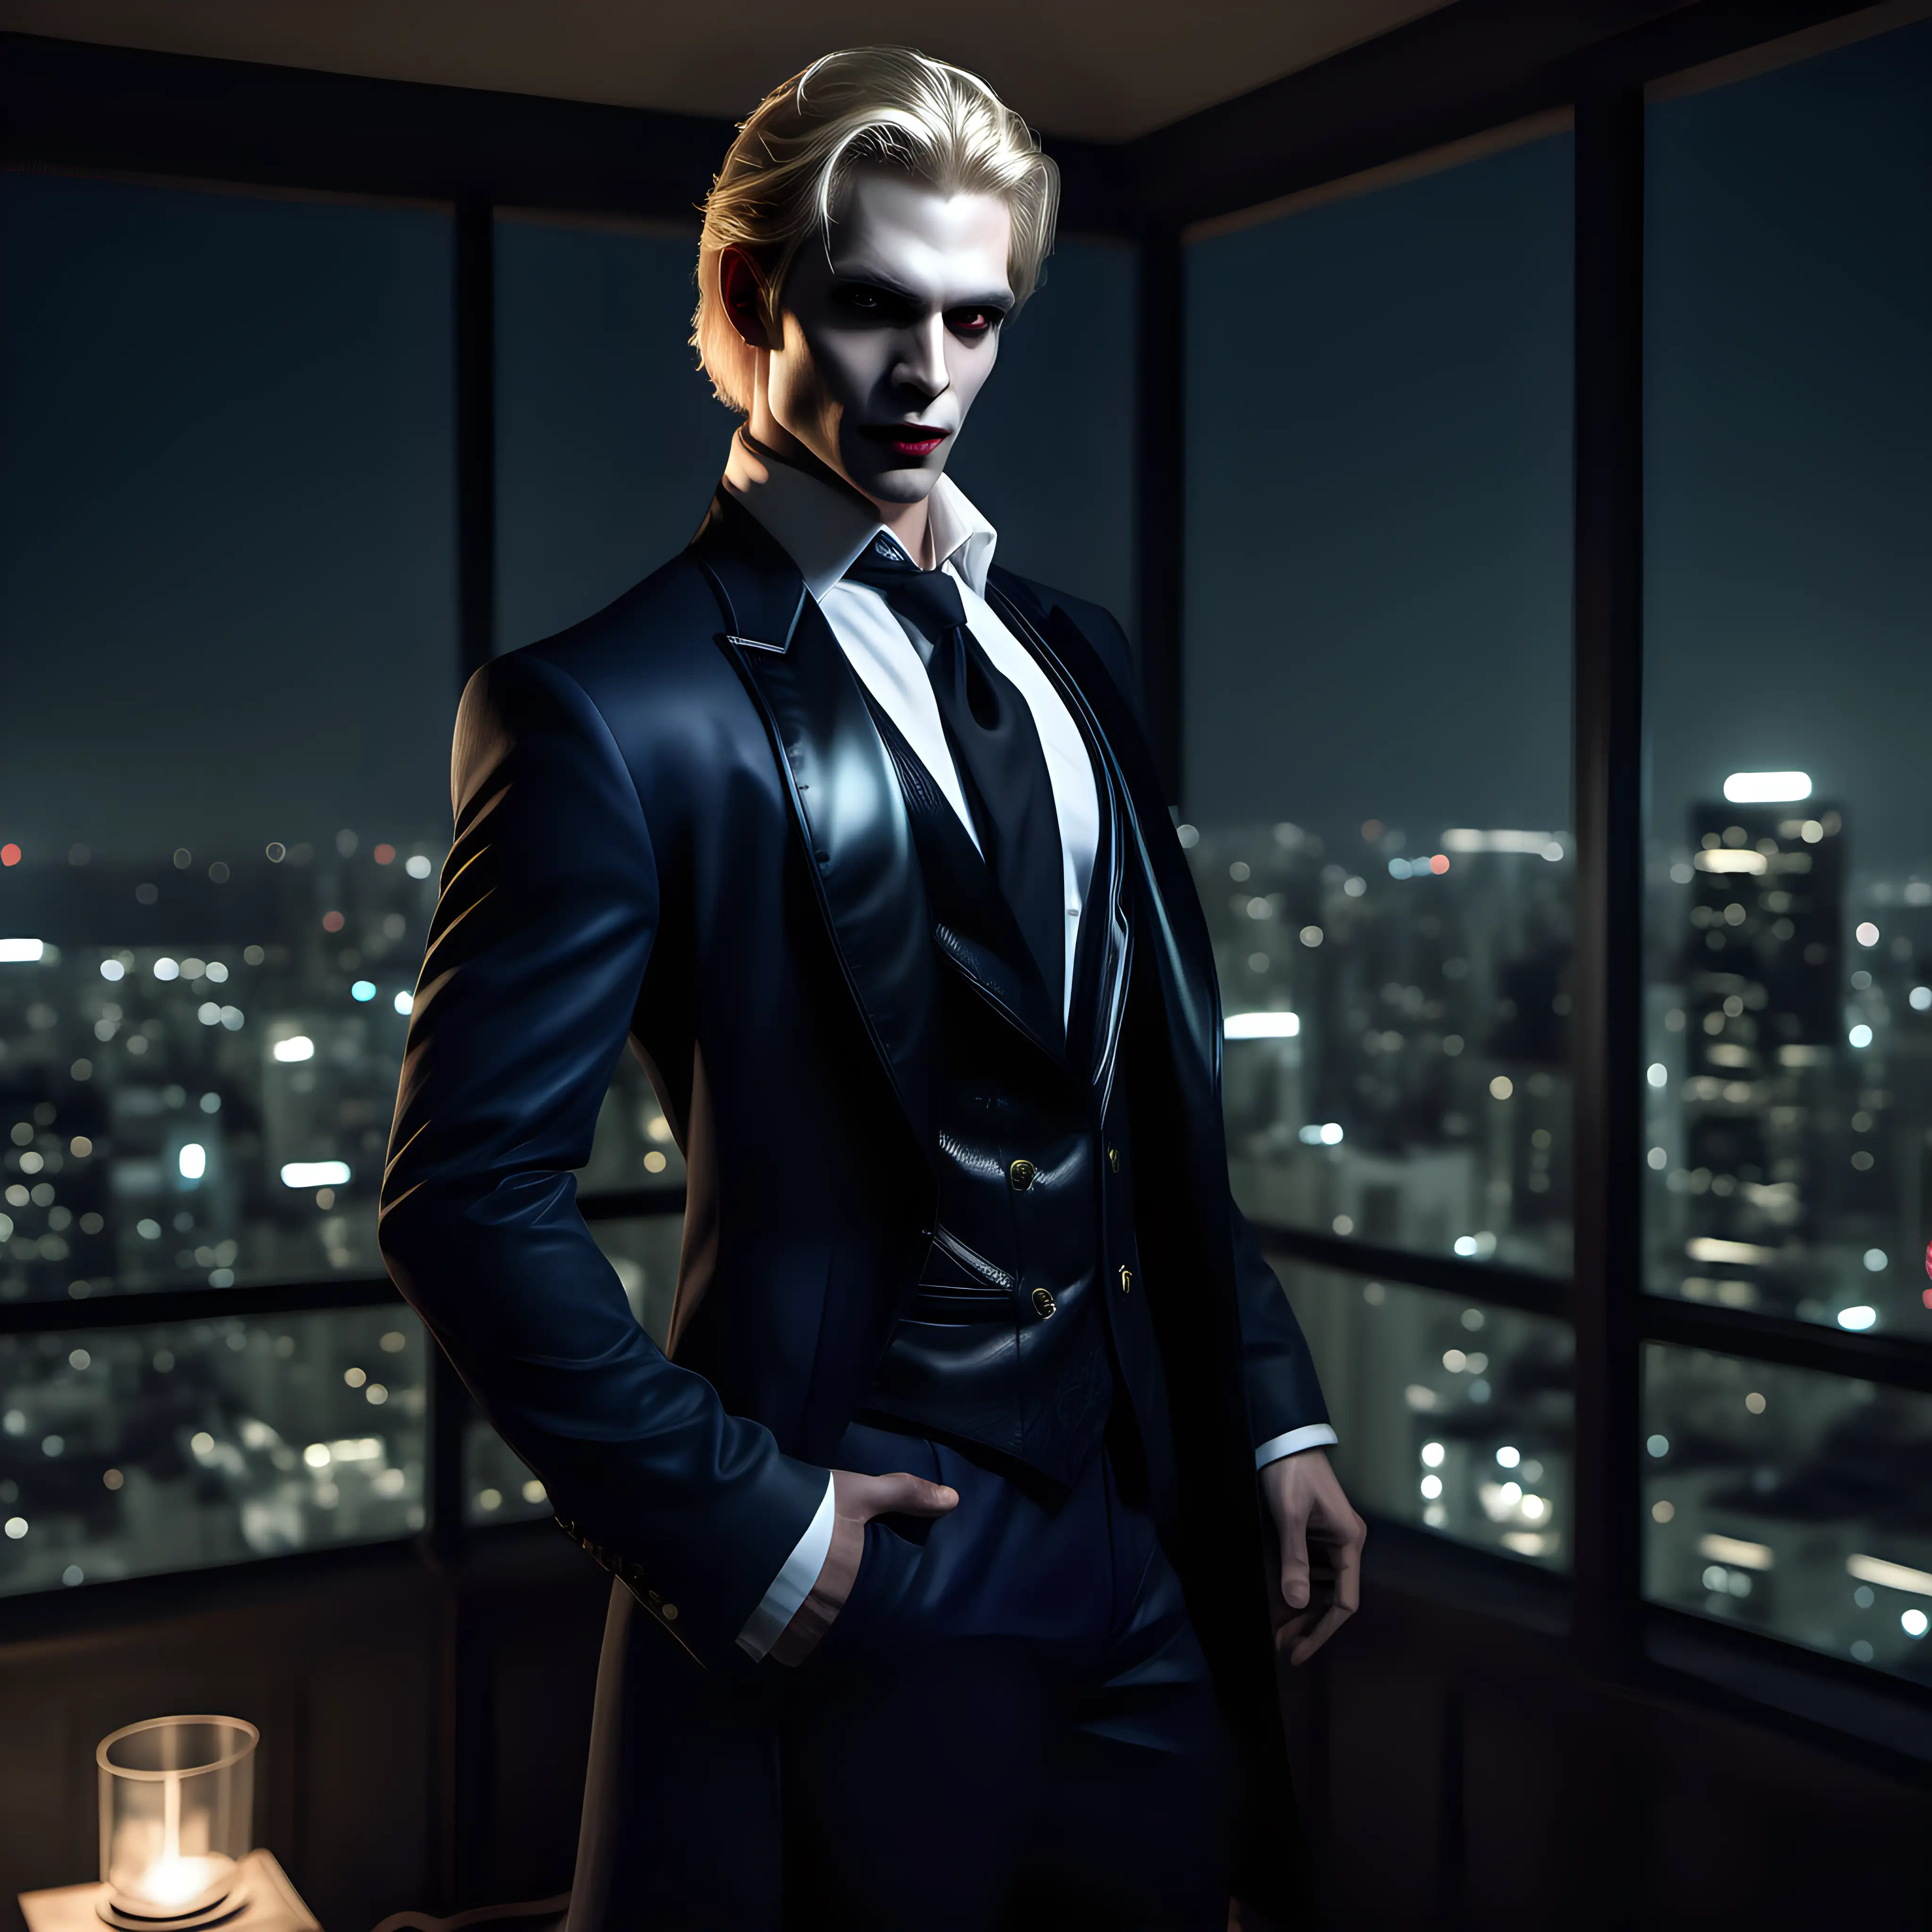 Blonde Caitiff Vampire Prince in Expensive Penthouse at Night